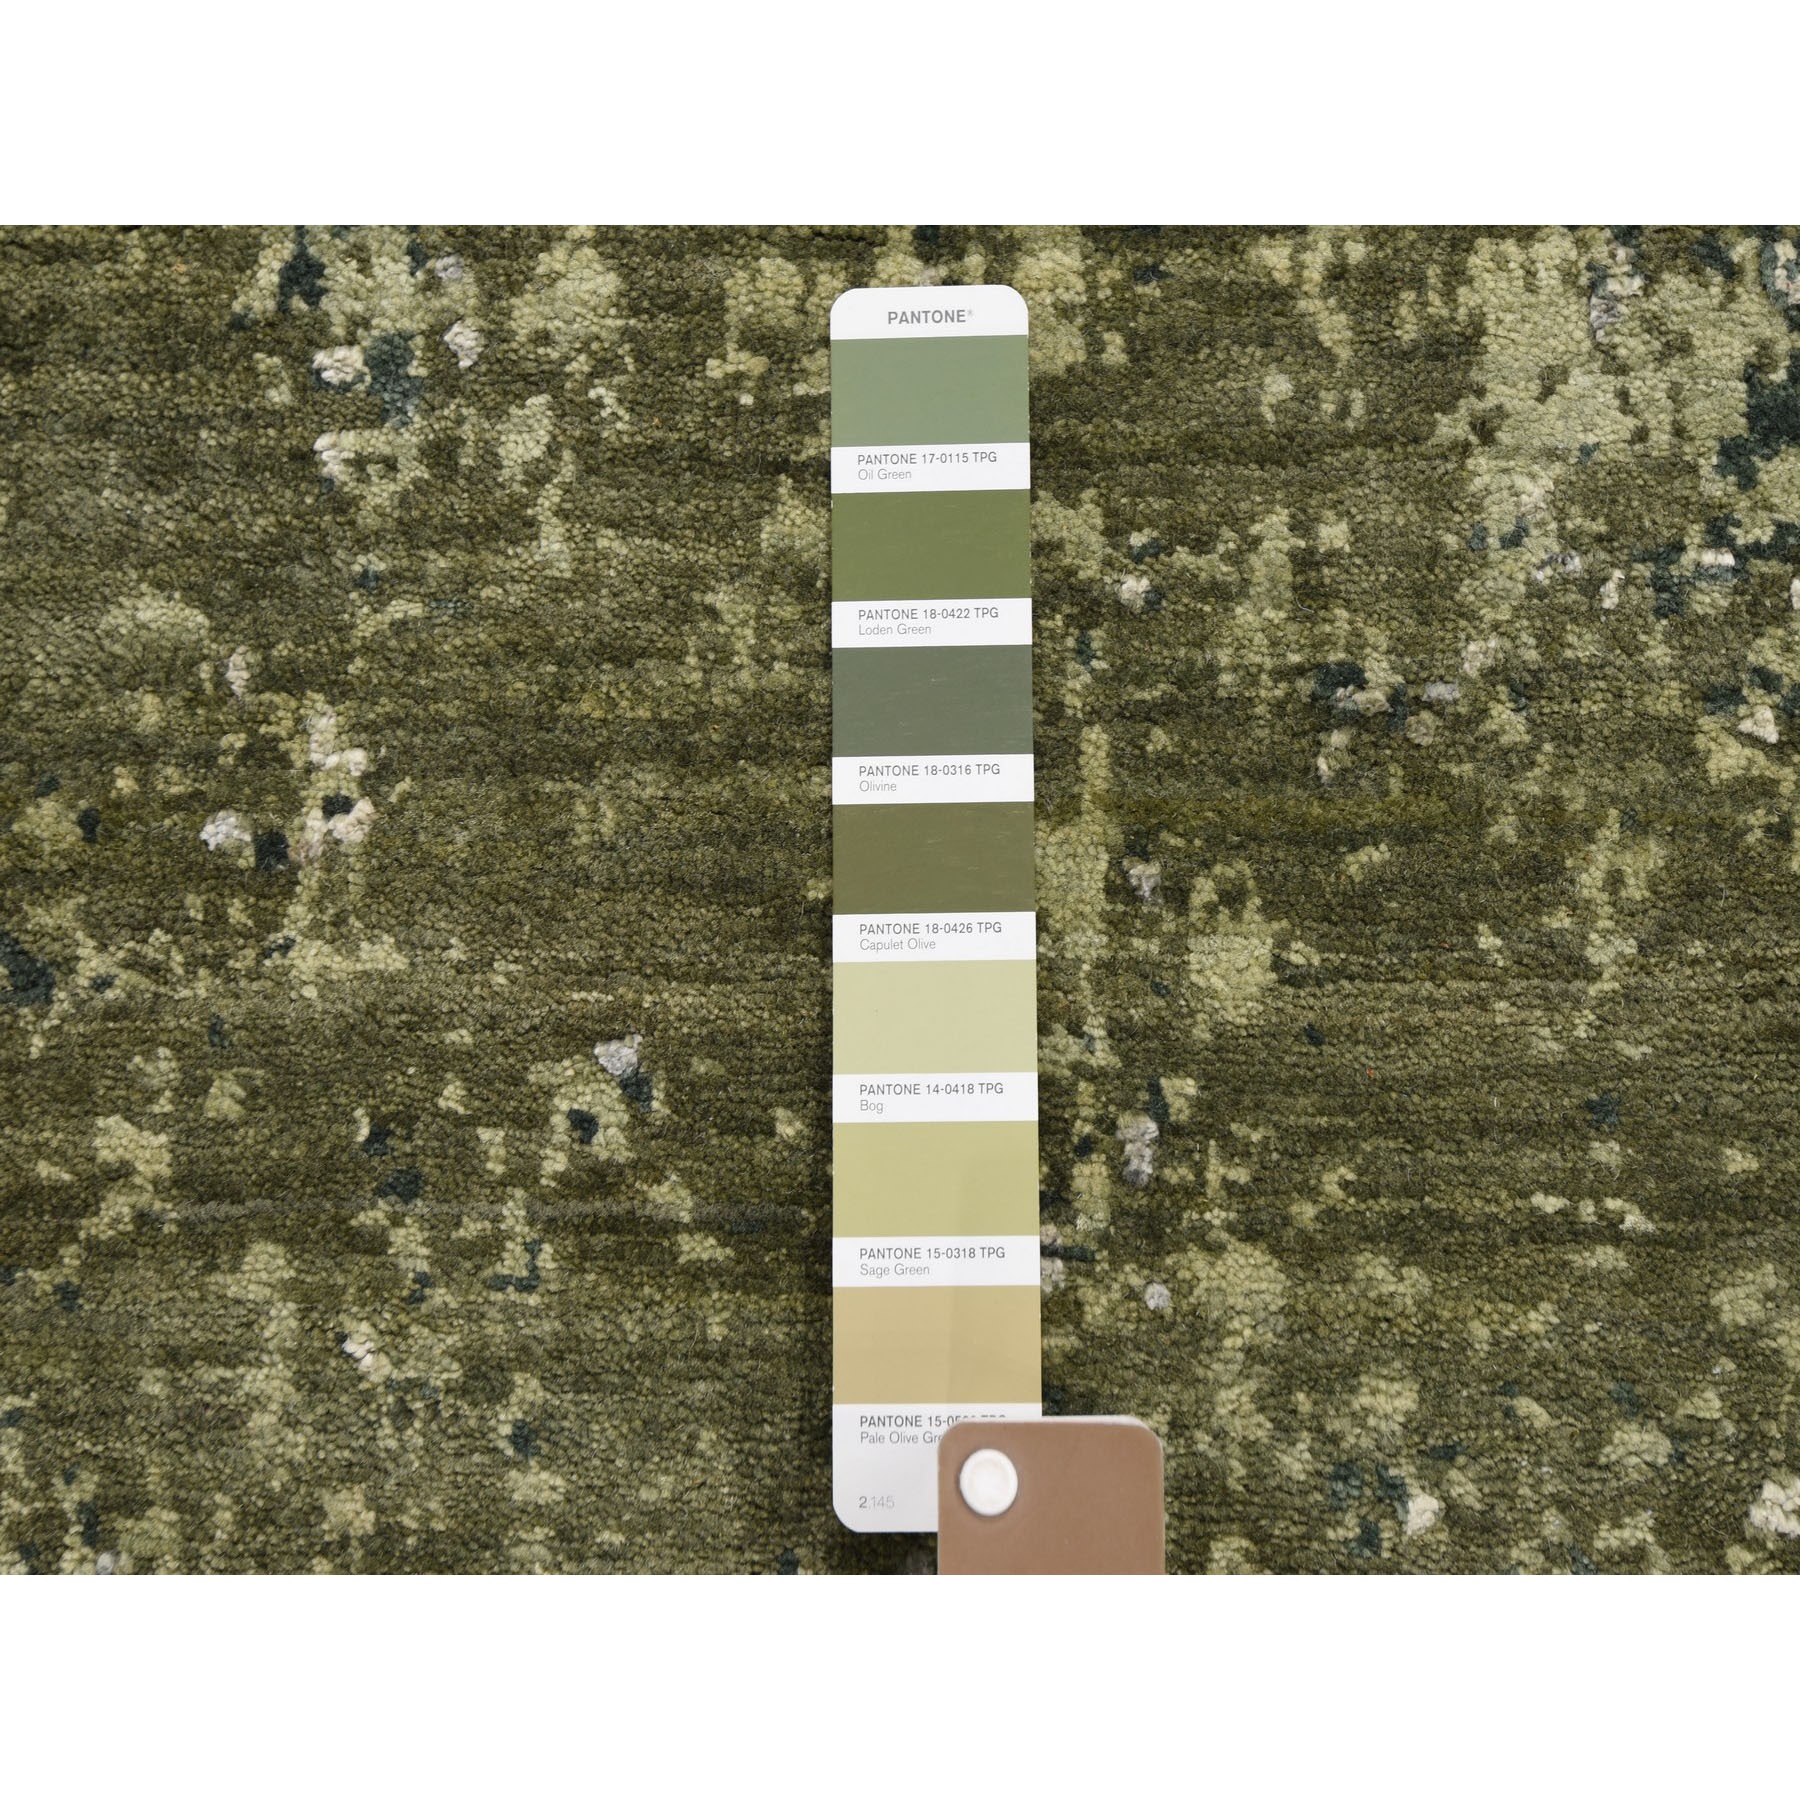 9'1"x12' The Greens, Pure Silk With Textured Wool Hand Woven Oriental Rug 